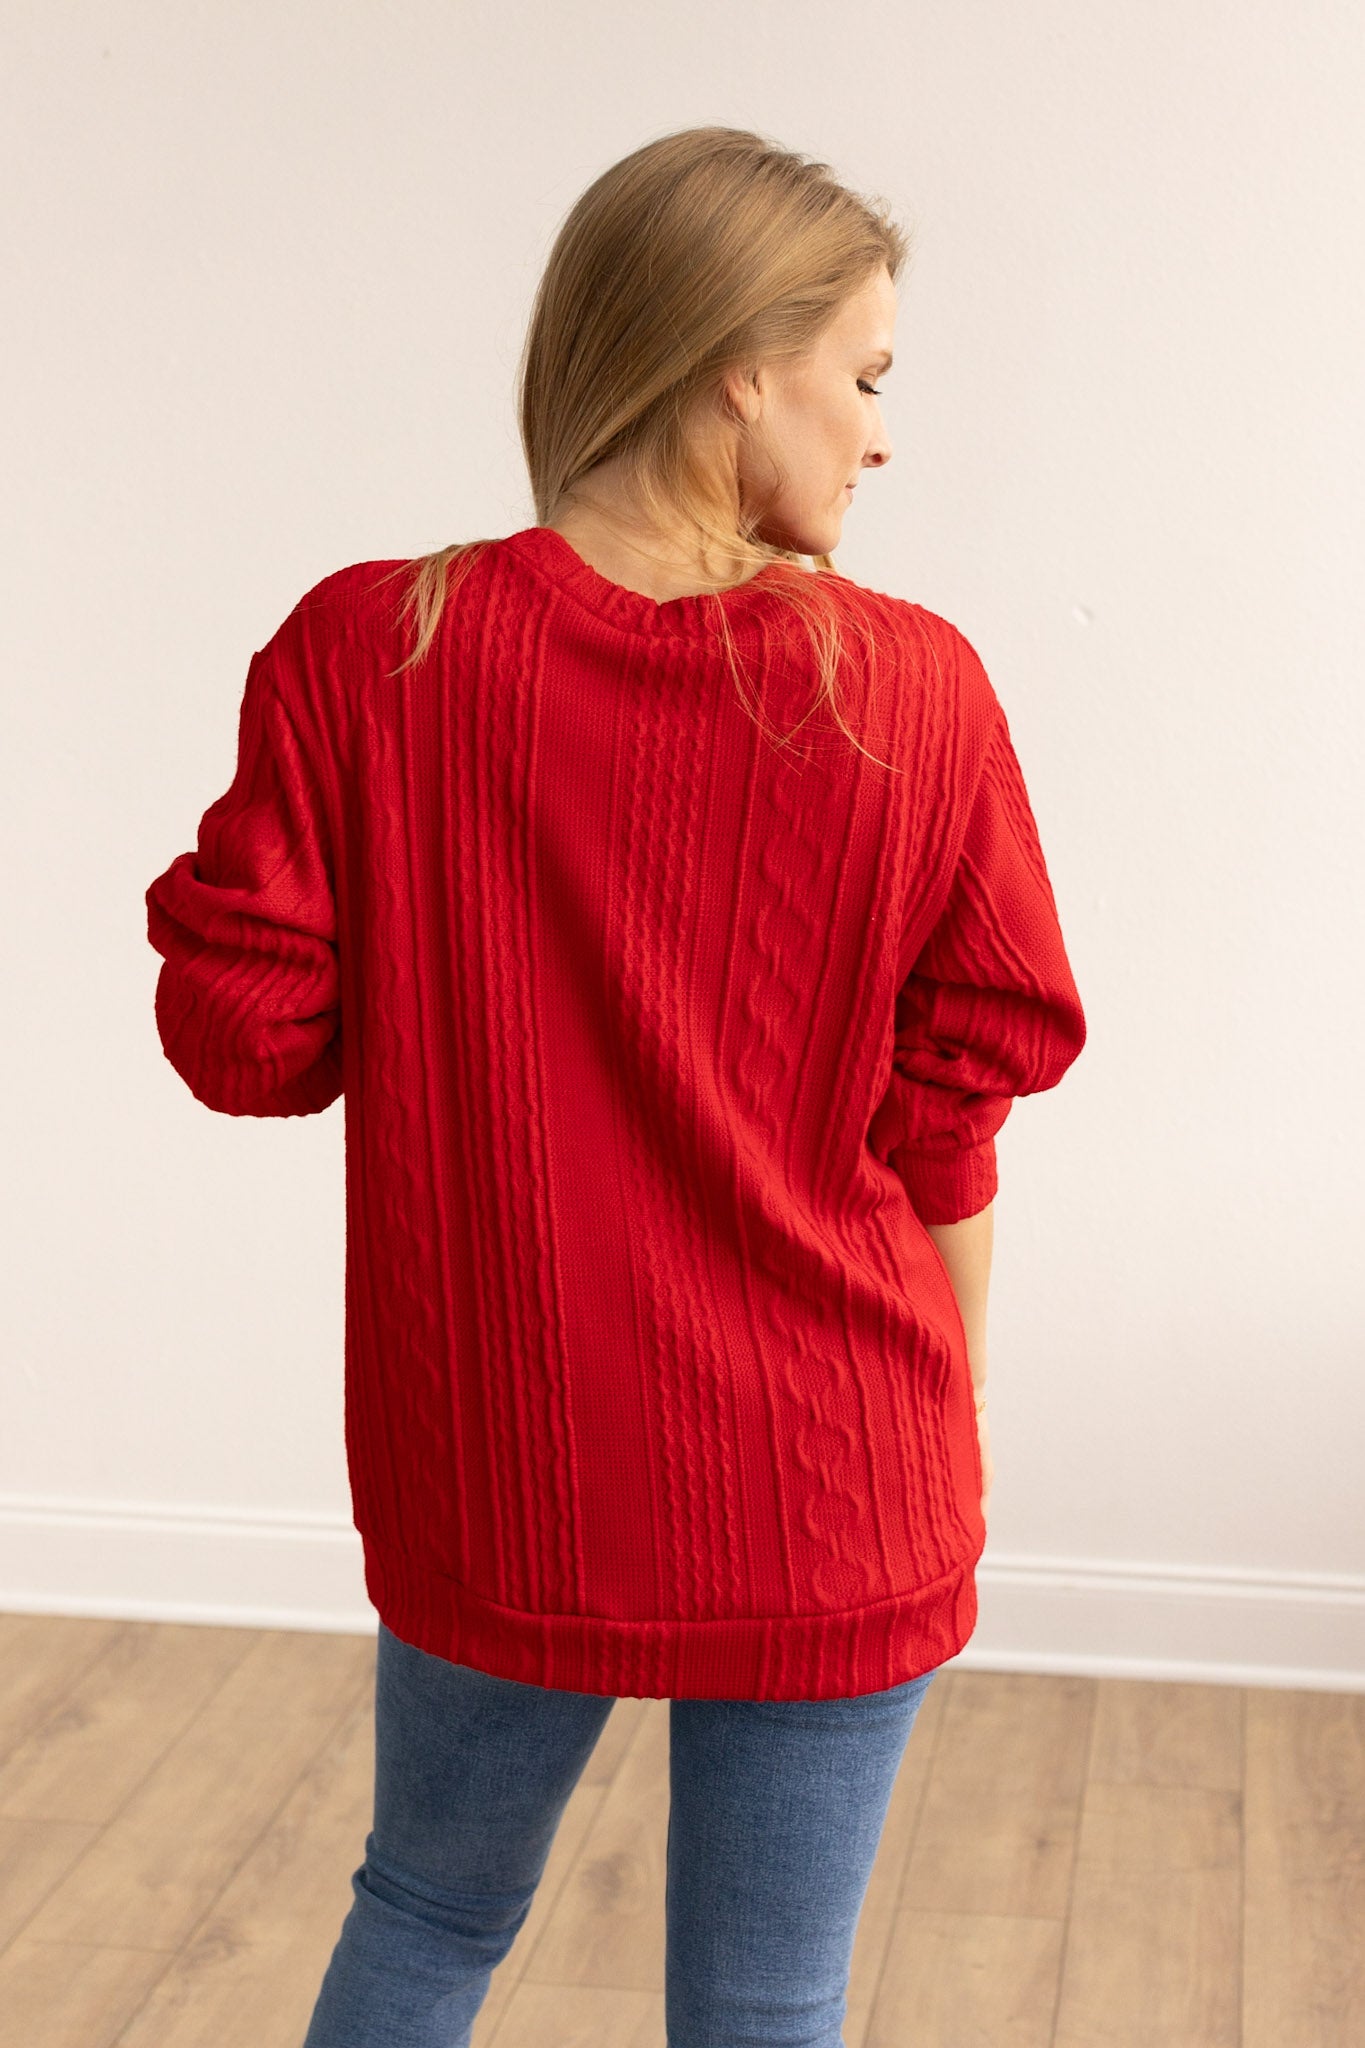 "Merry Christmas Y'all" on Red Knit Sweater